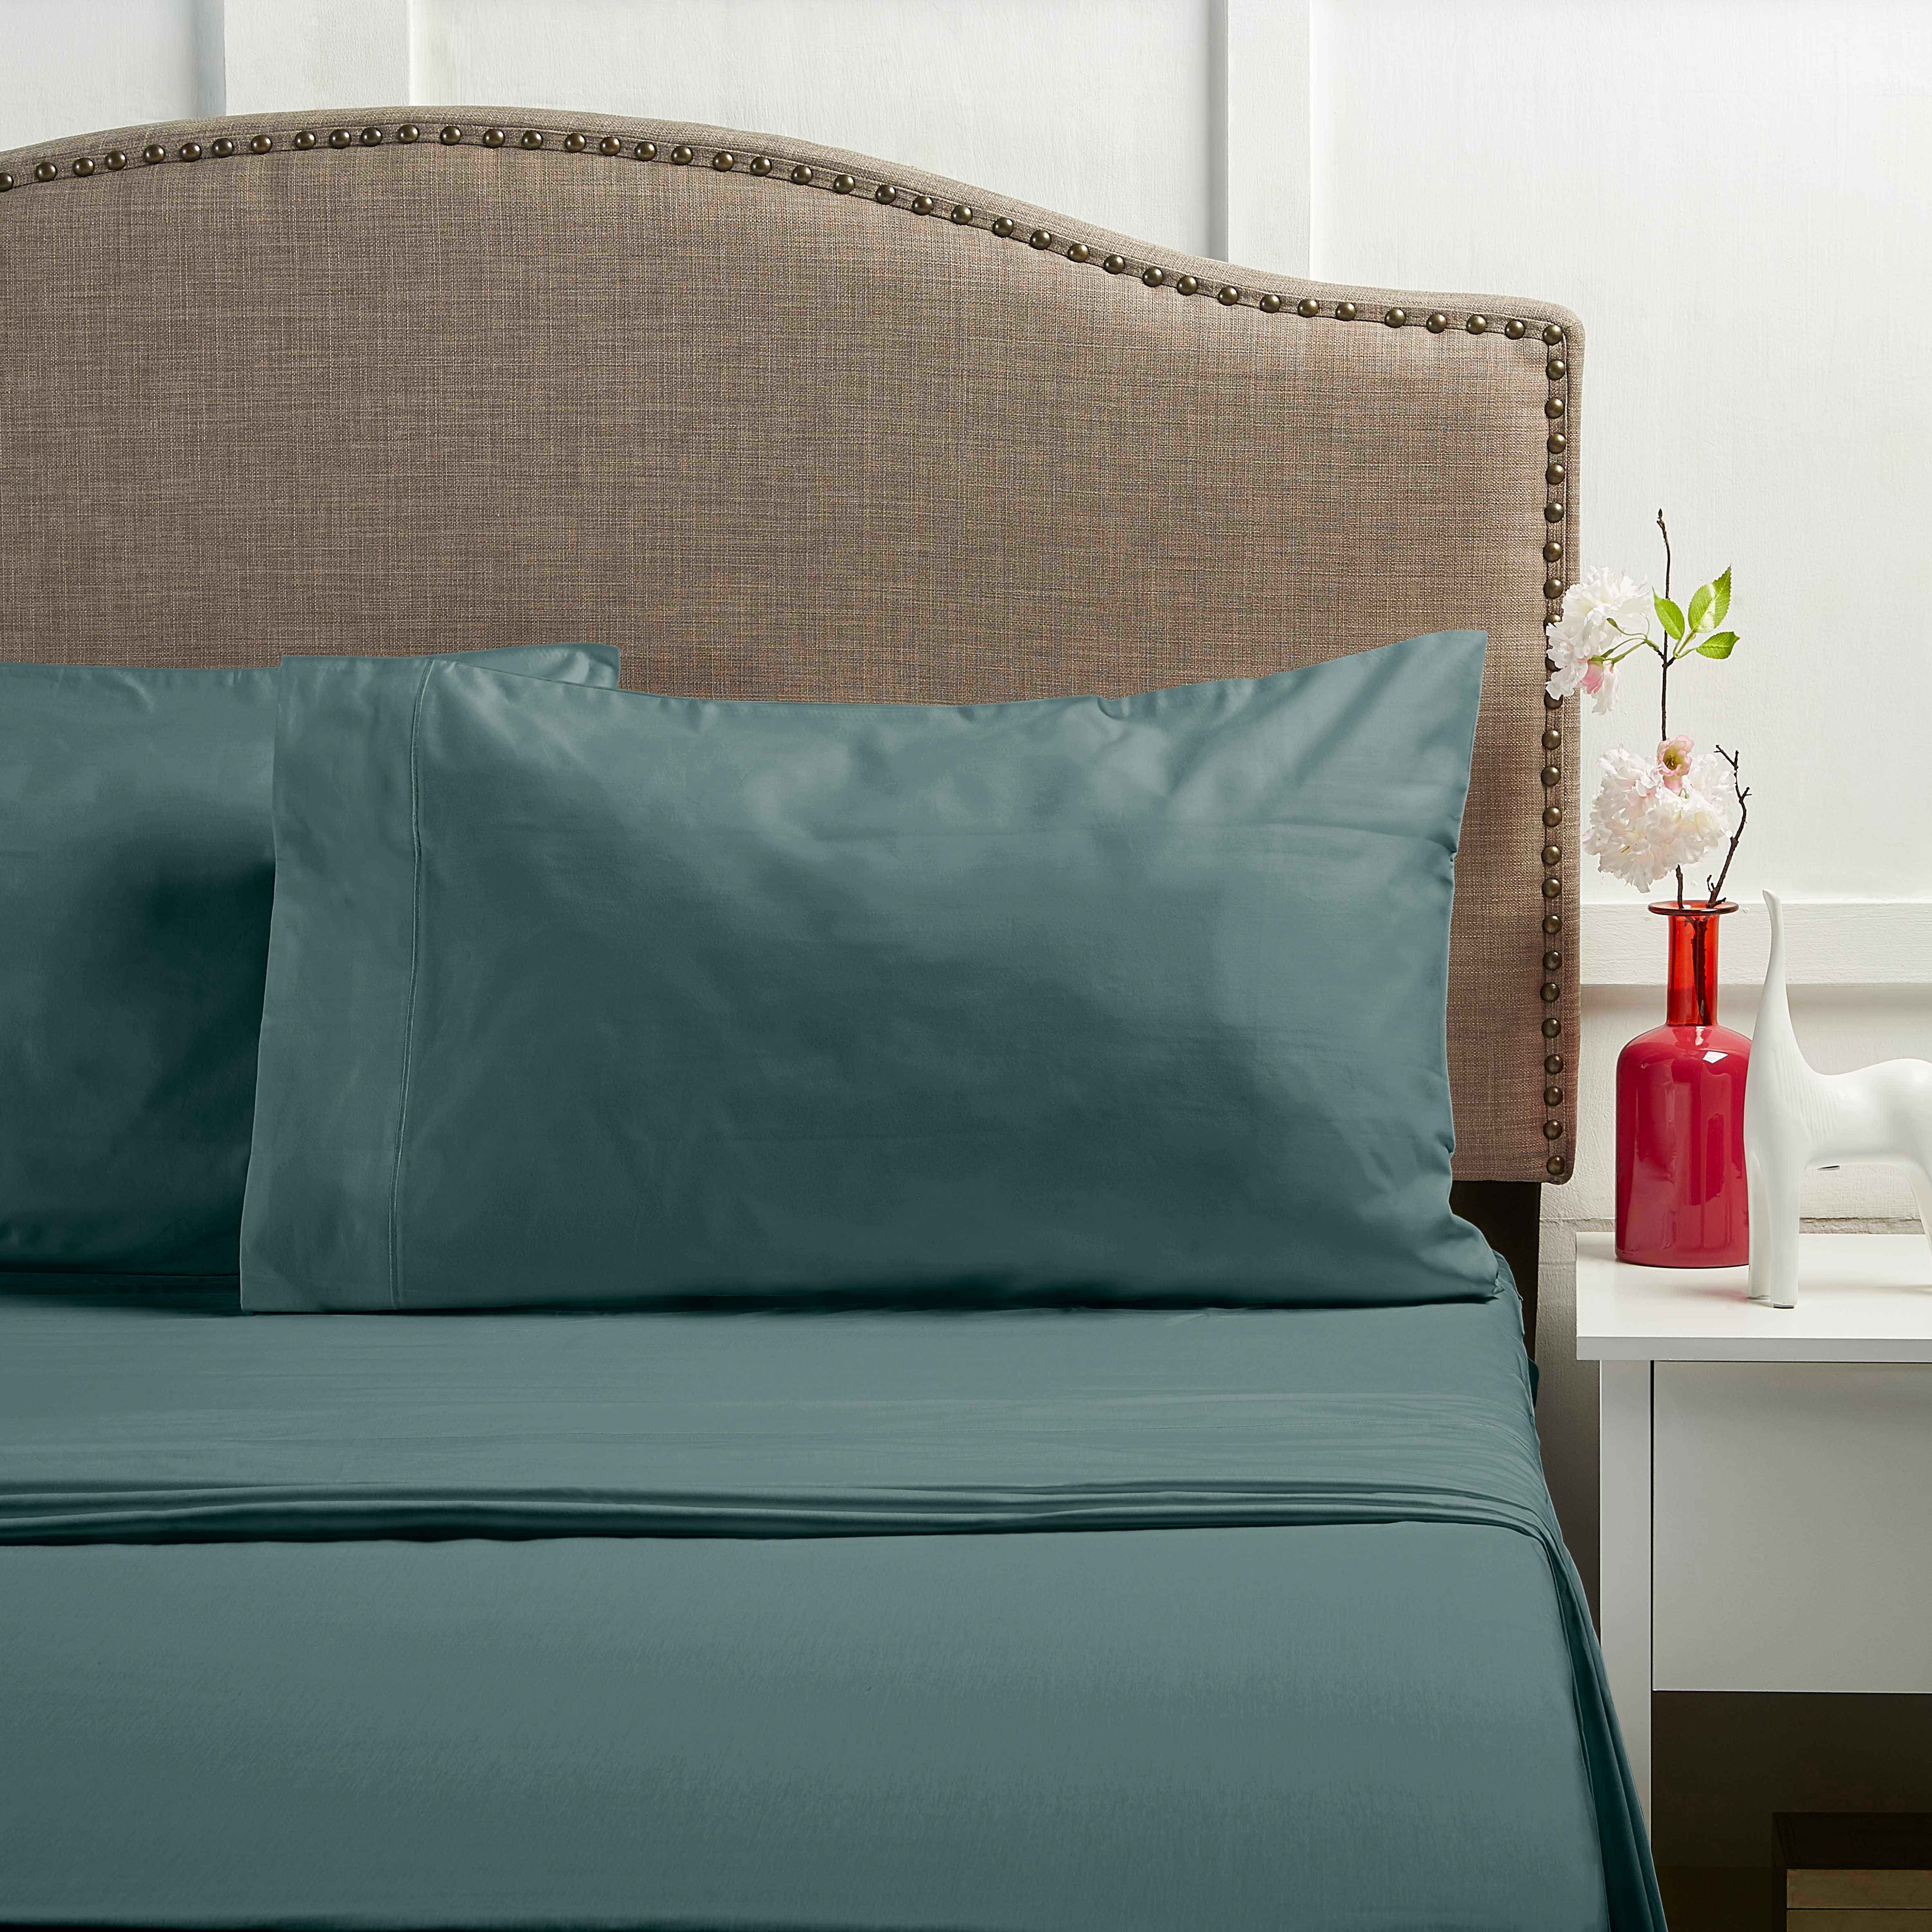 TEAL CLOUD DAMASK HOTEL STYLE 600 THREAD COUNT SET/2 PILLOW CASE KING 